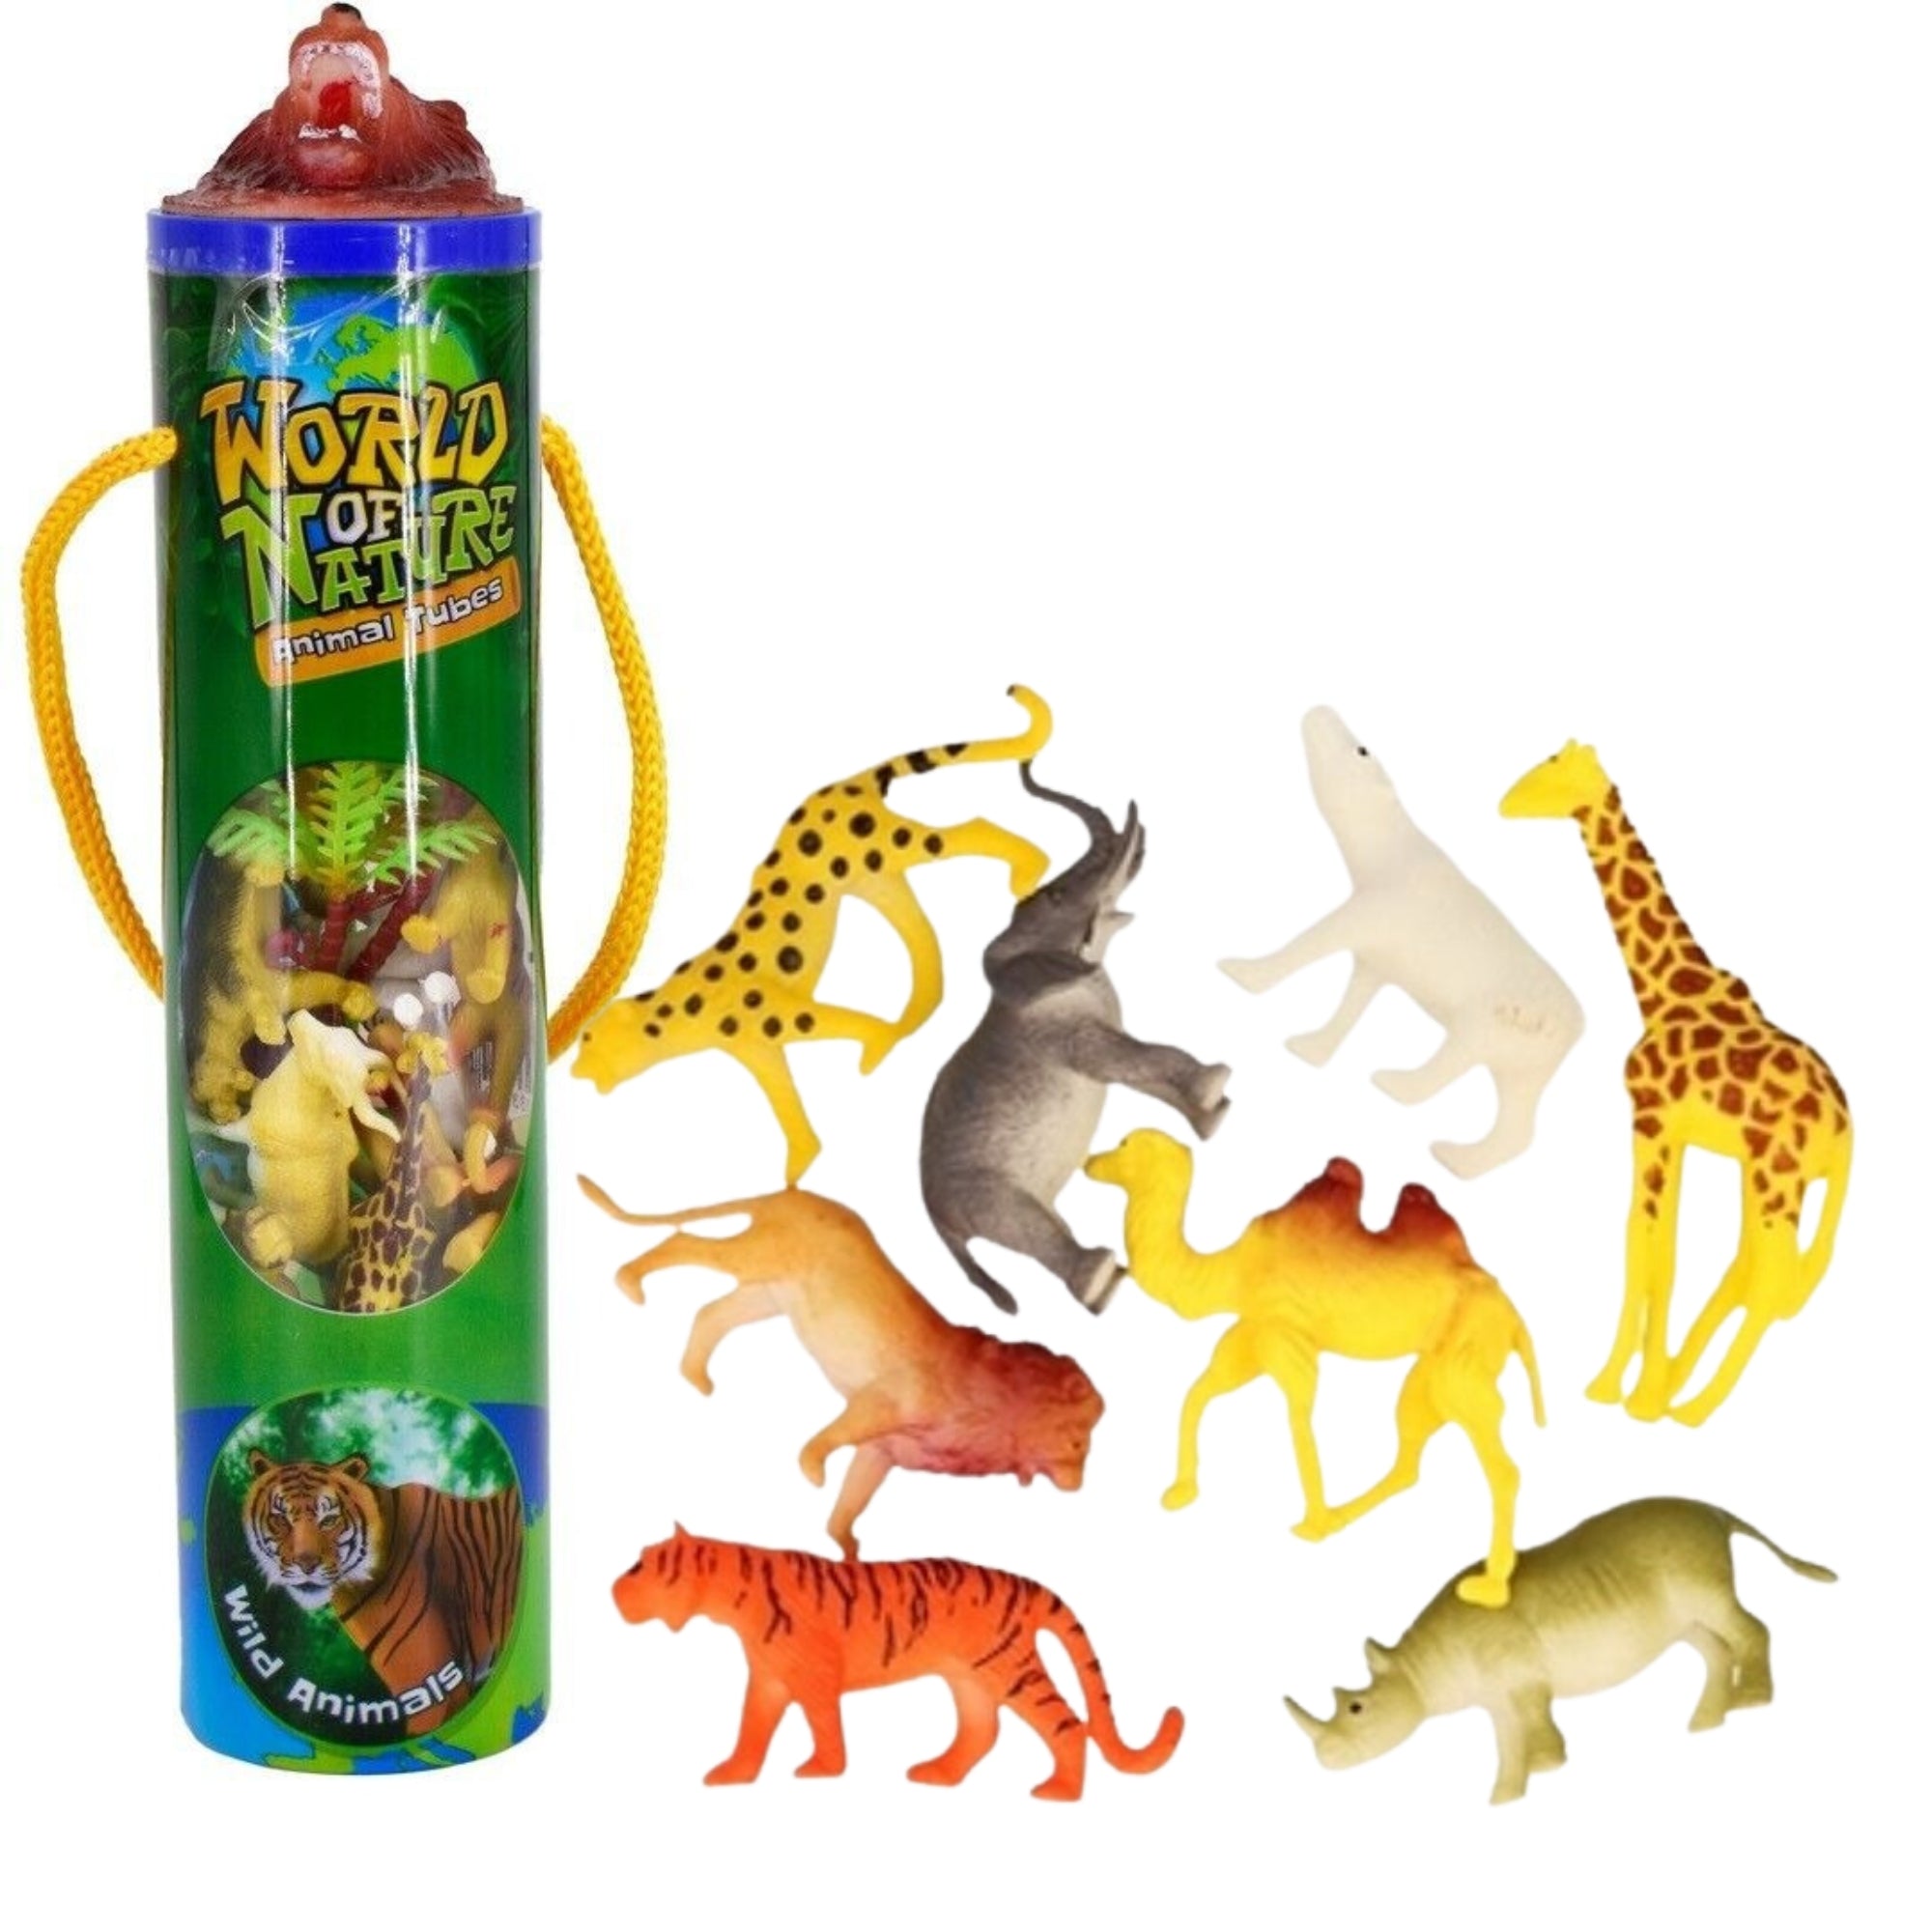 Safari Animal Tube, Bring the magic of a Safari expedition into your child's playtime with our Safari Animal Tube! This tube is packed with a variety of animal-themed toys, including lions, giraffes, and more, to create a new world of make-believe.Your little one can embark on an exciting adventure to the African savannah, encountering wild animals along the way.The tube features a convenient carry handle, making it easy to bring the Safari Animal Tube wherever your child goes. When playtime is over, the tu